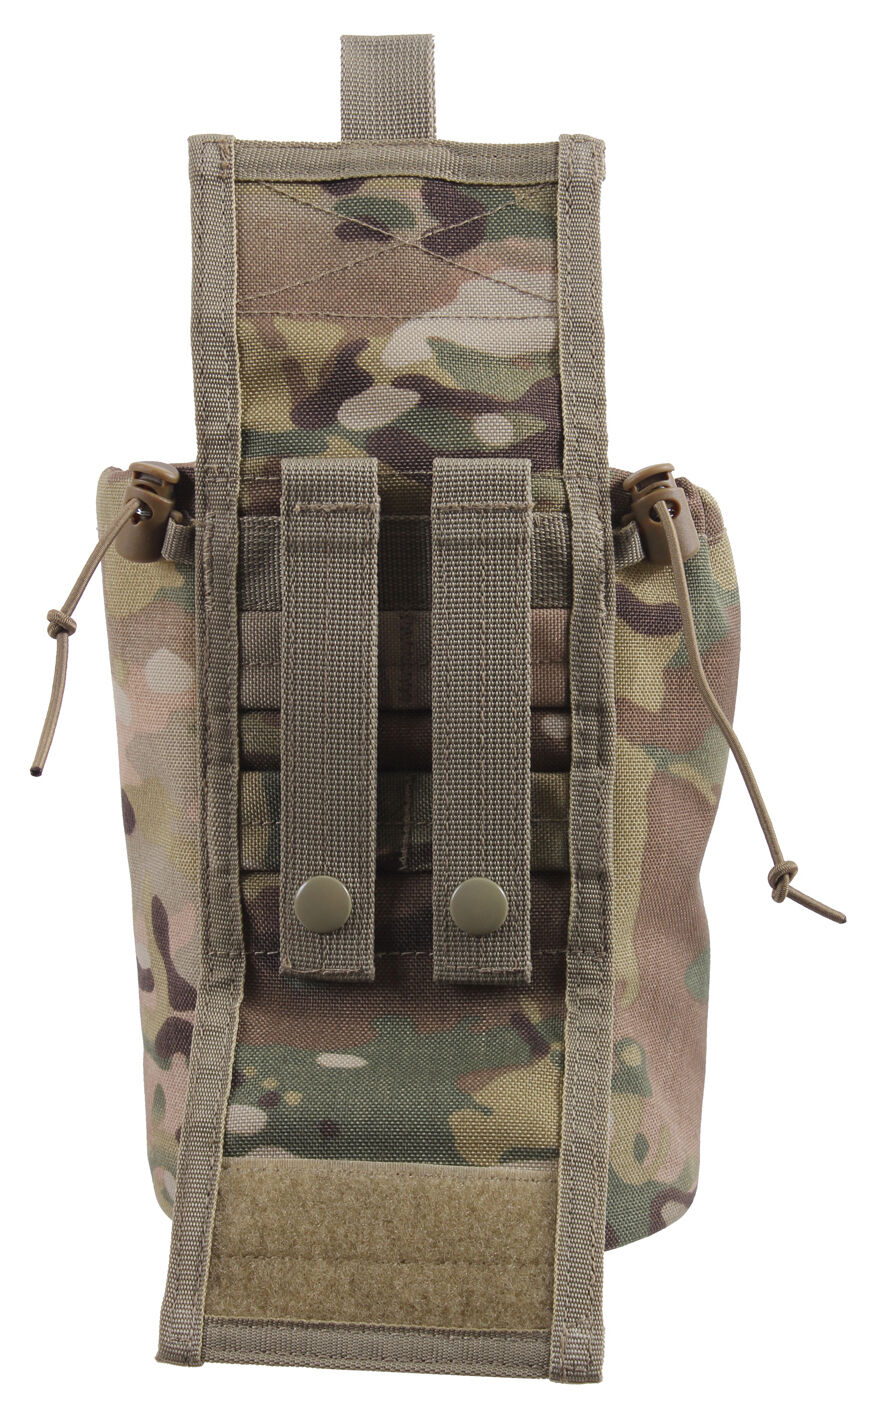 Rothco Tactical MOLLE EDC Wallet and Phone Pouch - Multicam Camo